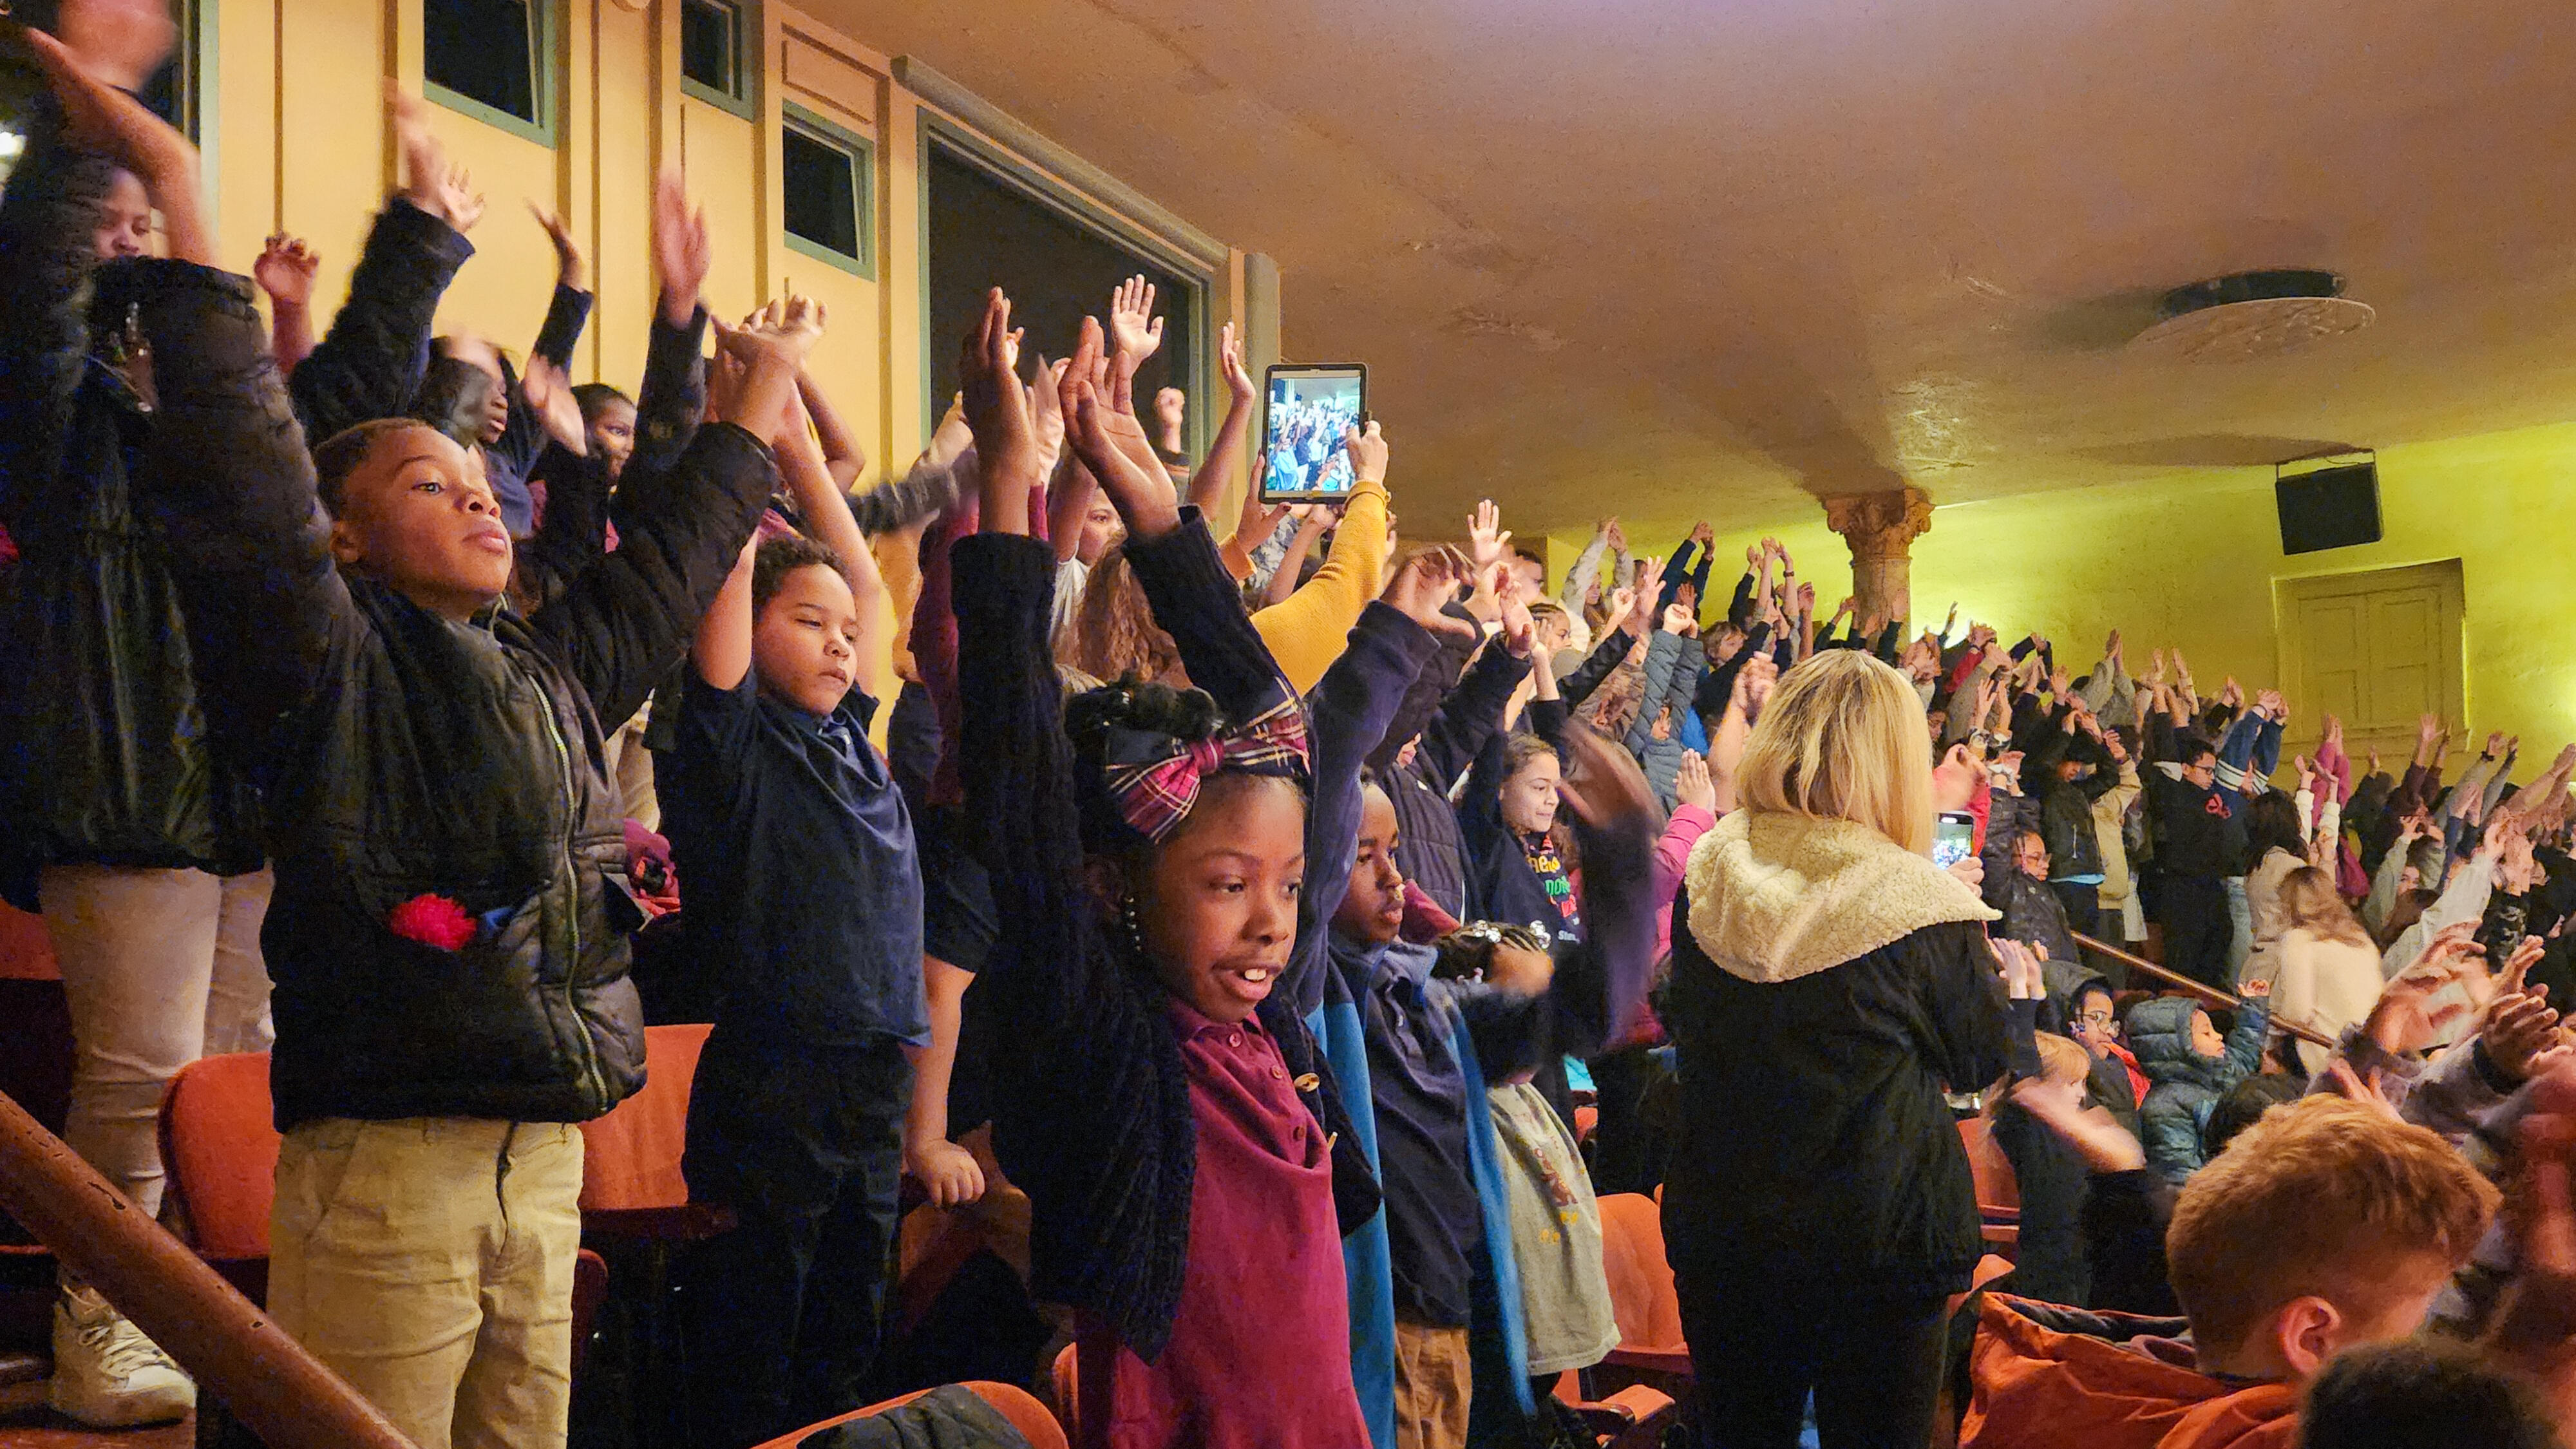 Barrett Elementary students participate in an interactive portion of Step Afrika performance at the Byham Theater